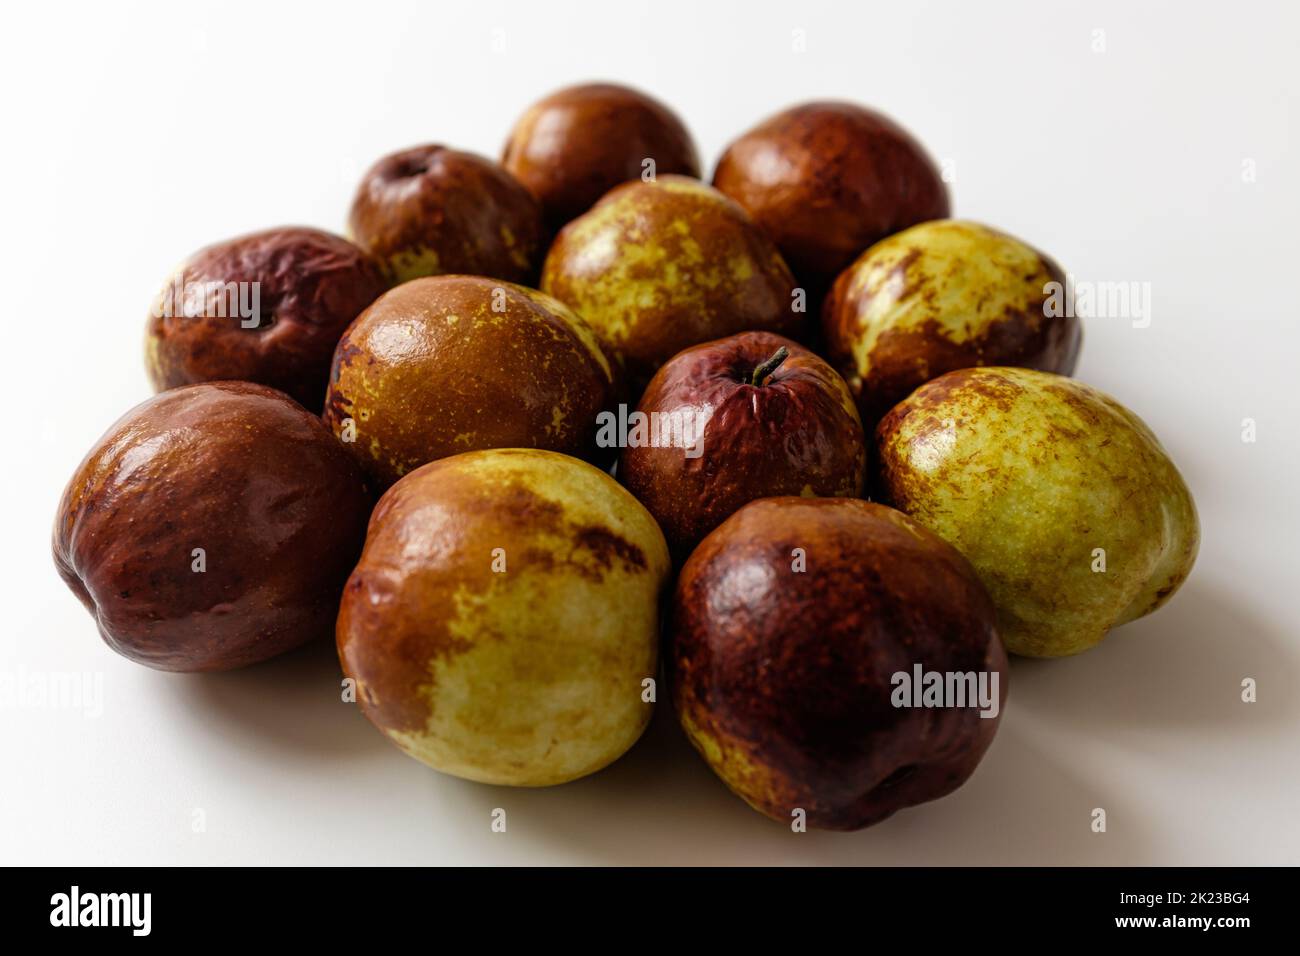 sweet fruit. fruit in a round shape. fruits eaten in asia Stock Photo